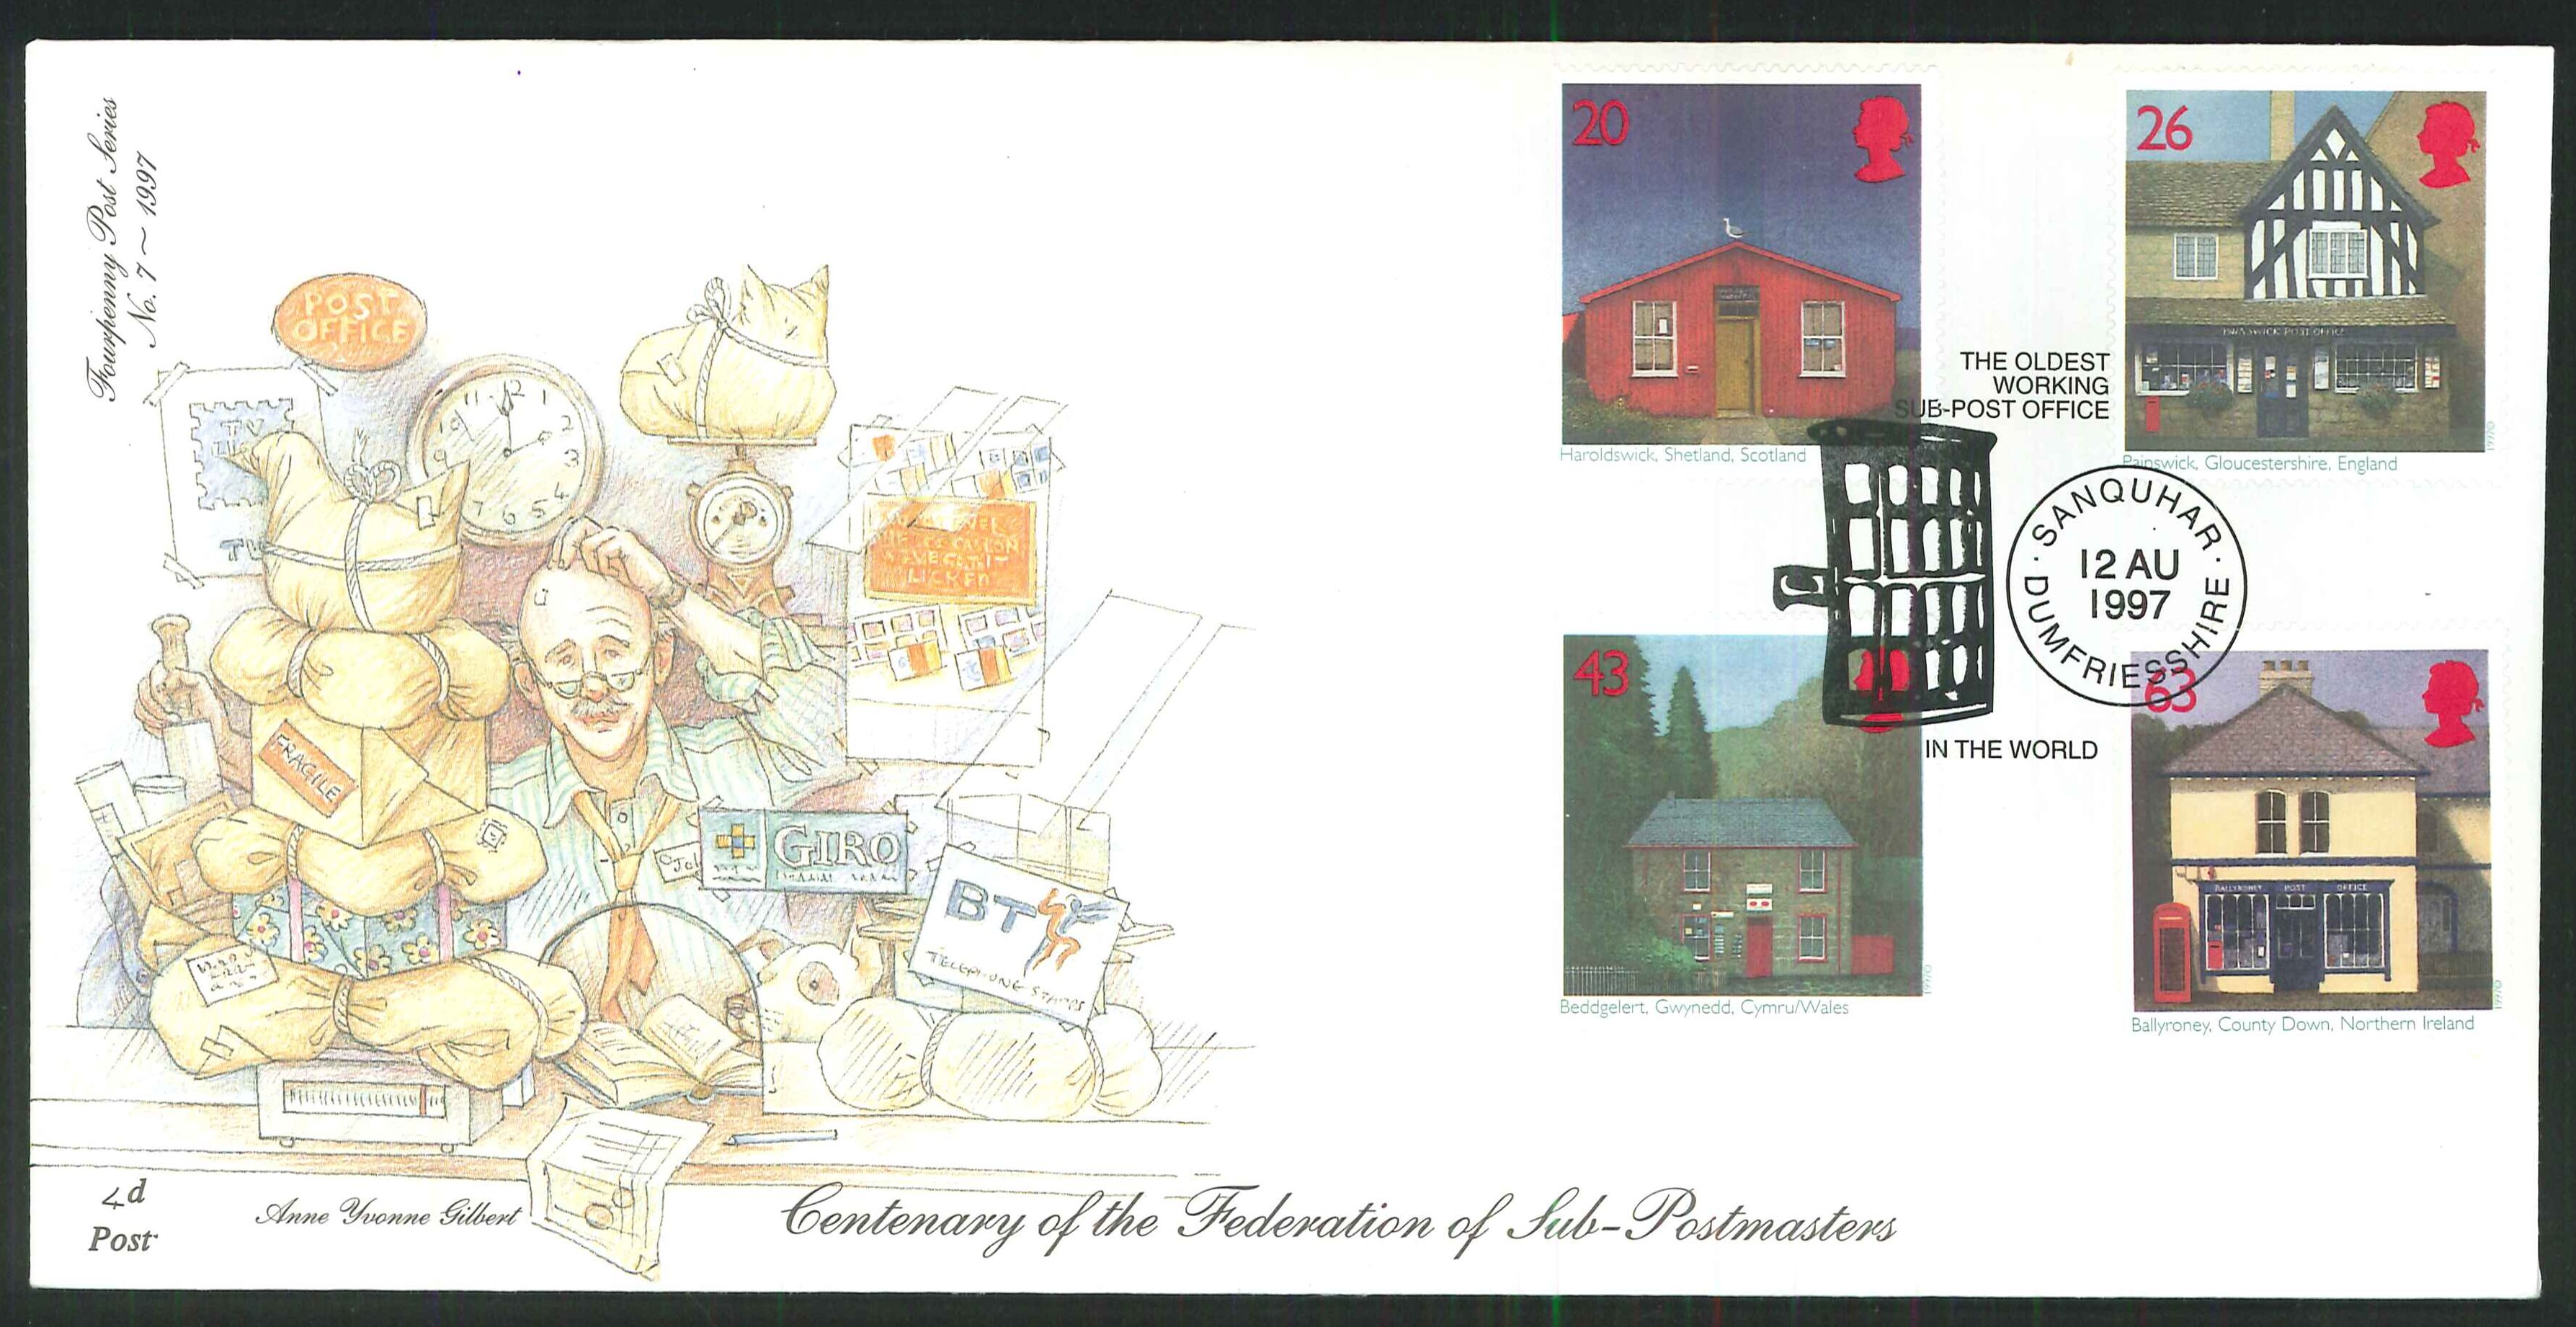 1997 - Centenary of the Federation of Sub Postmasters, Sanquhar, Dumfrieshire Postmark